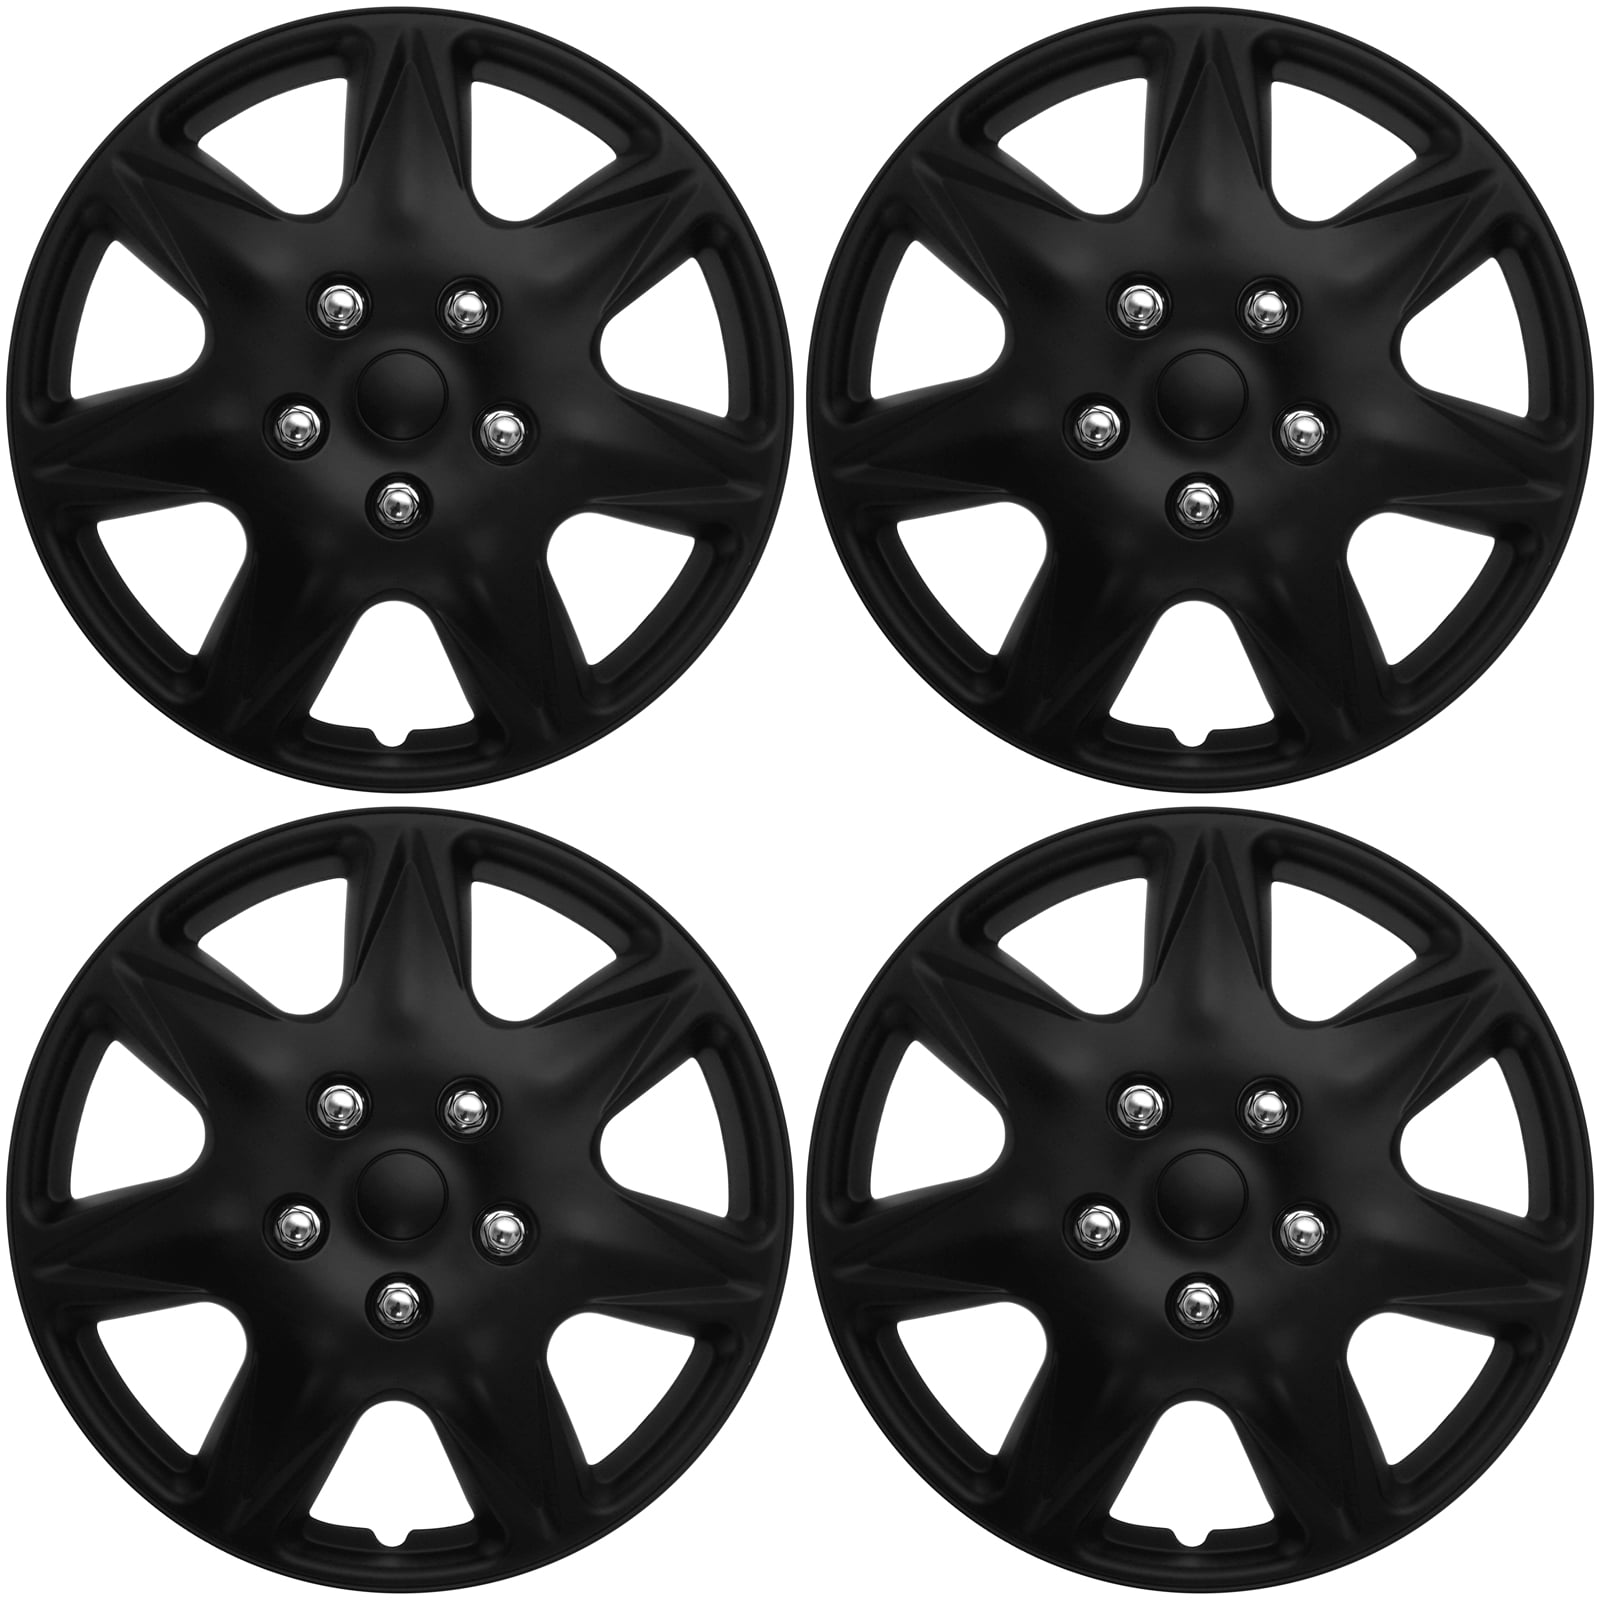 Fits most 15 Inch Factory Steel Wheels. Set of 4 Cover Trend ,Universal Matte Black 15 Hub Caps Wheel Covers 